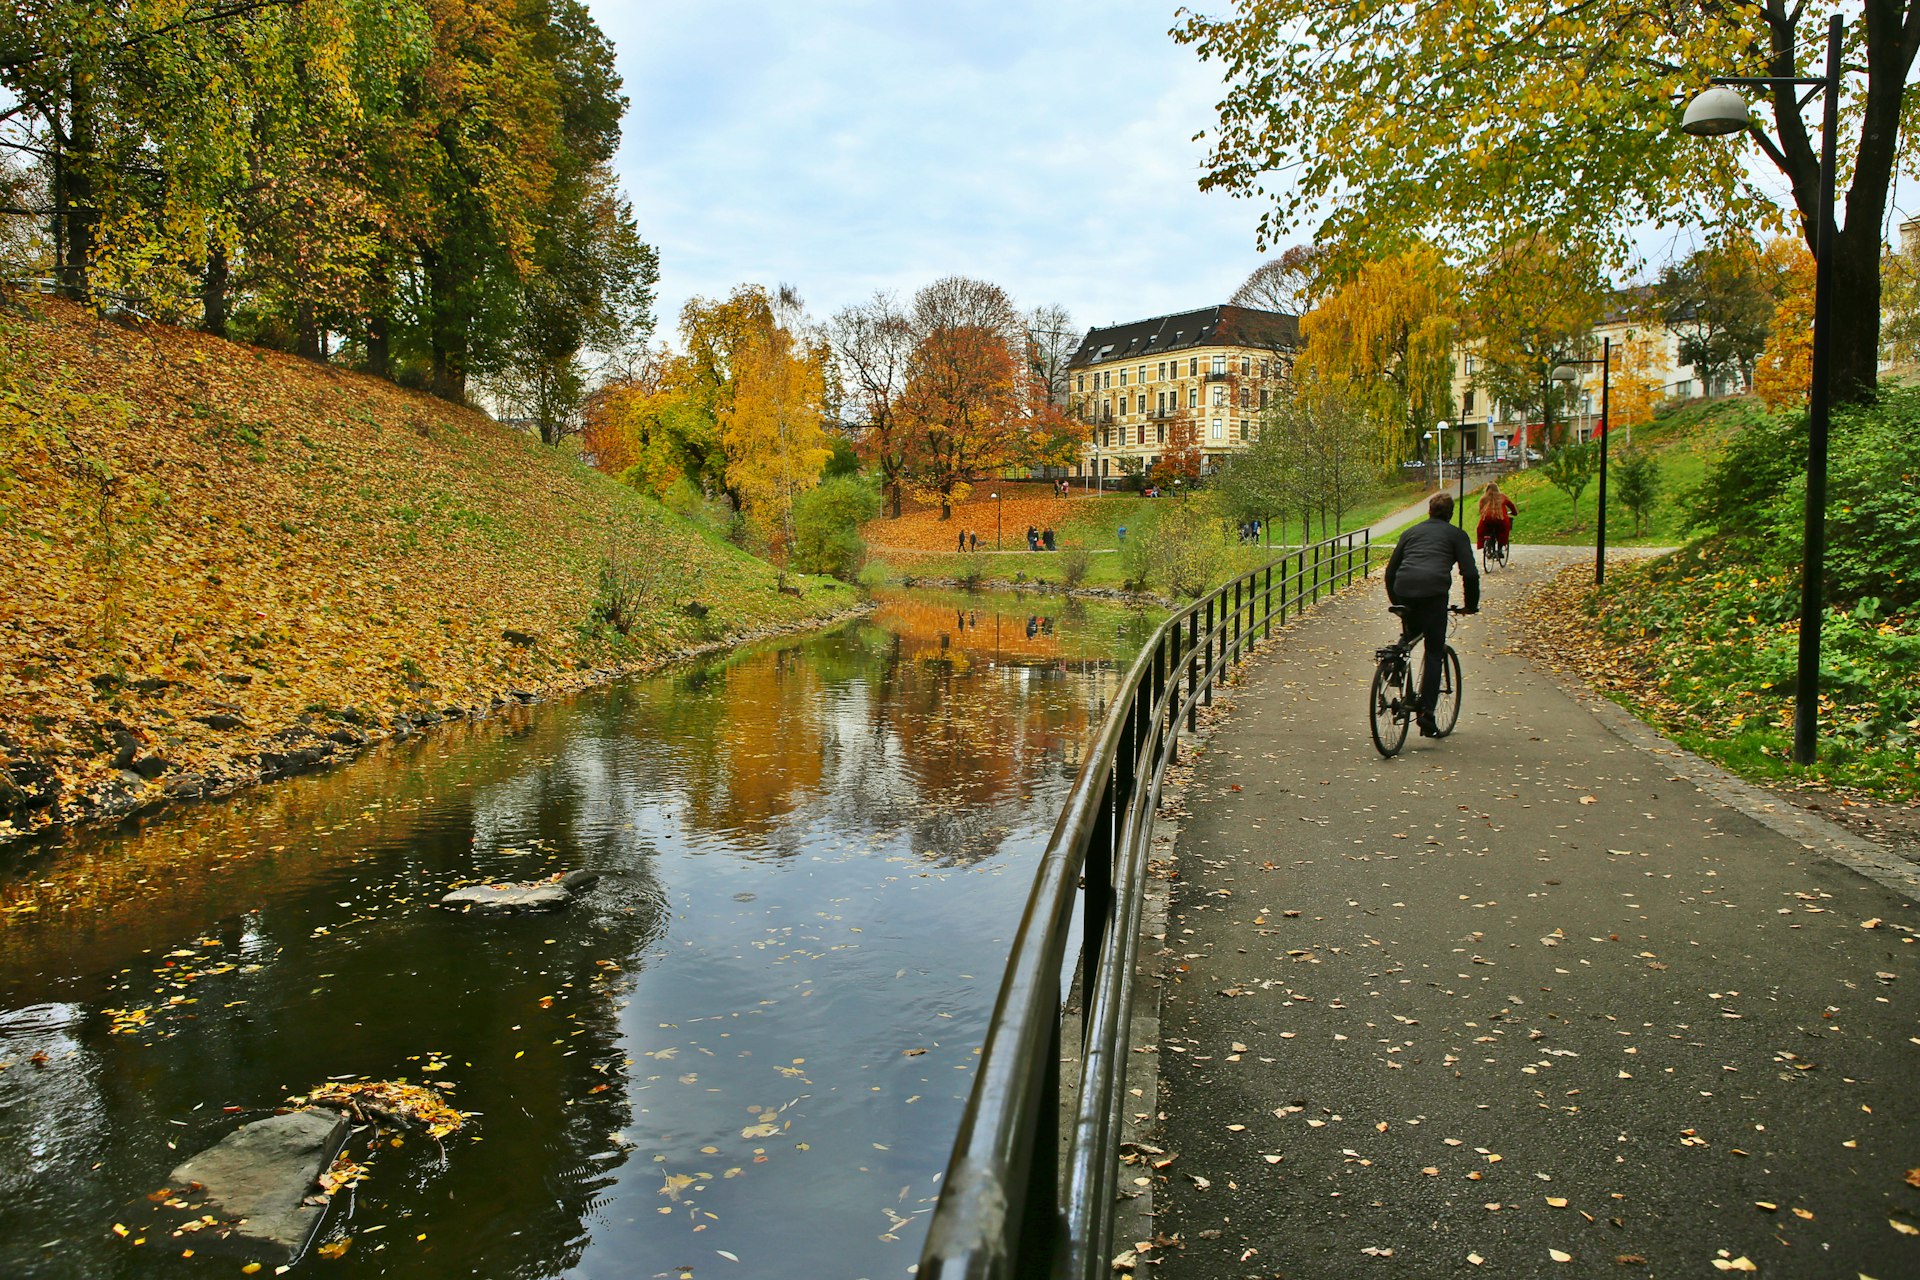 A man bicycles by fall foliage along the walking path by River Akerselva, Oslo, Norway